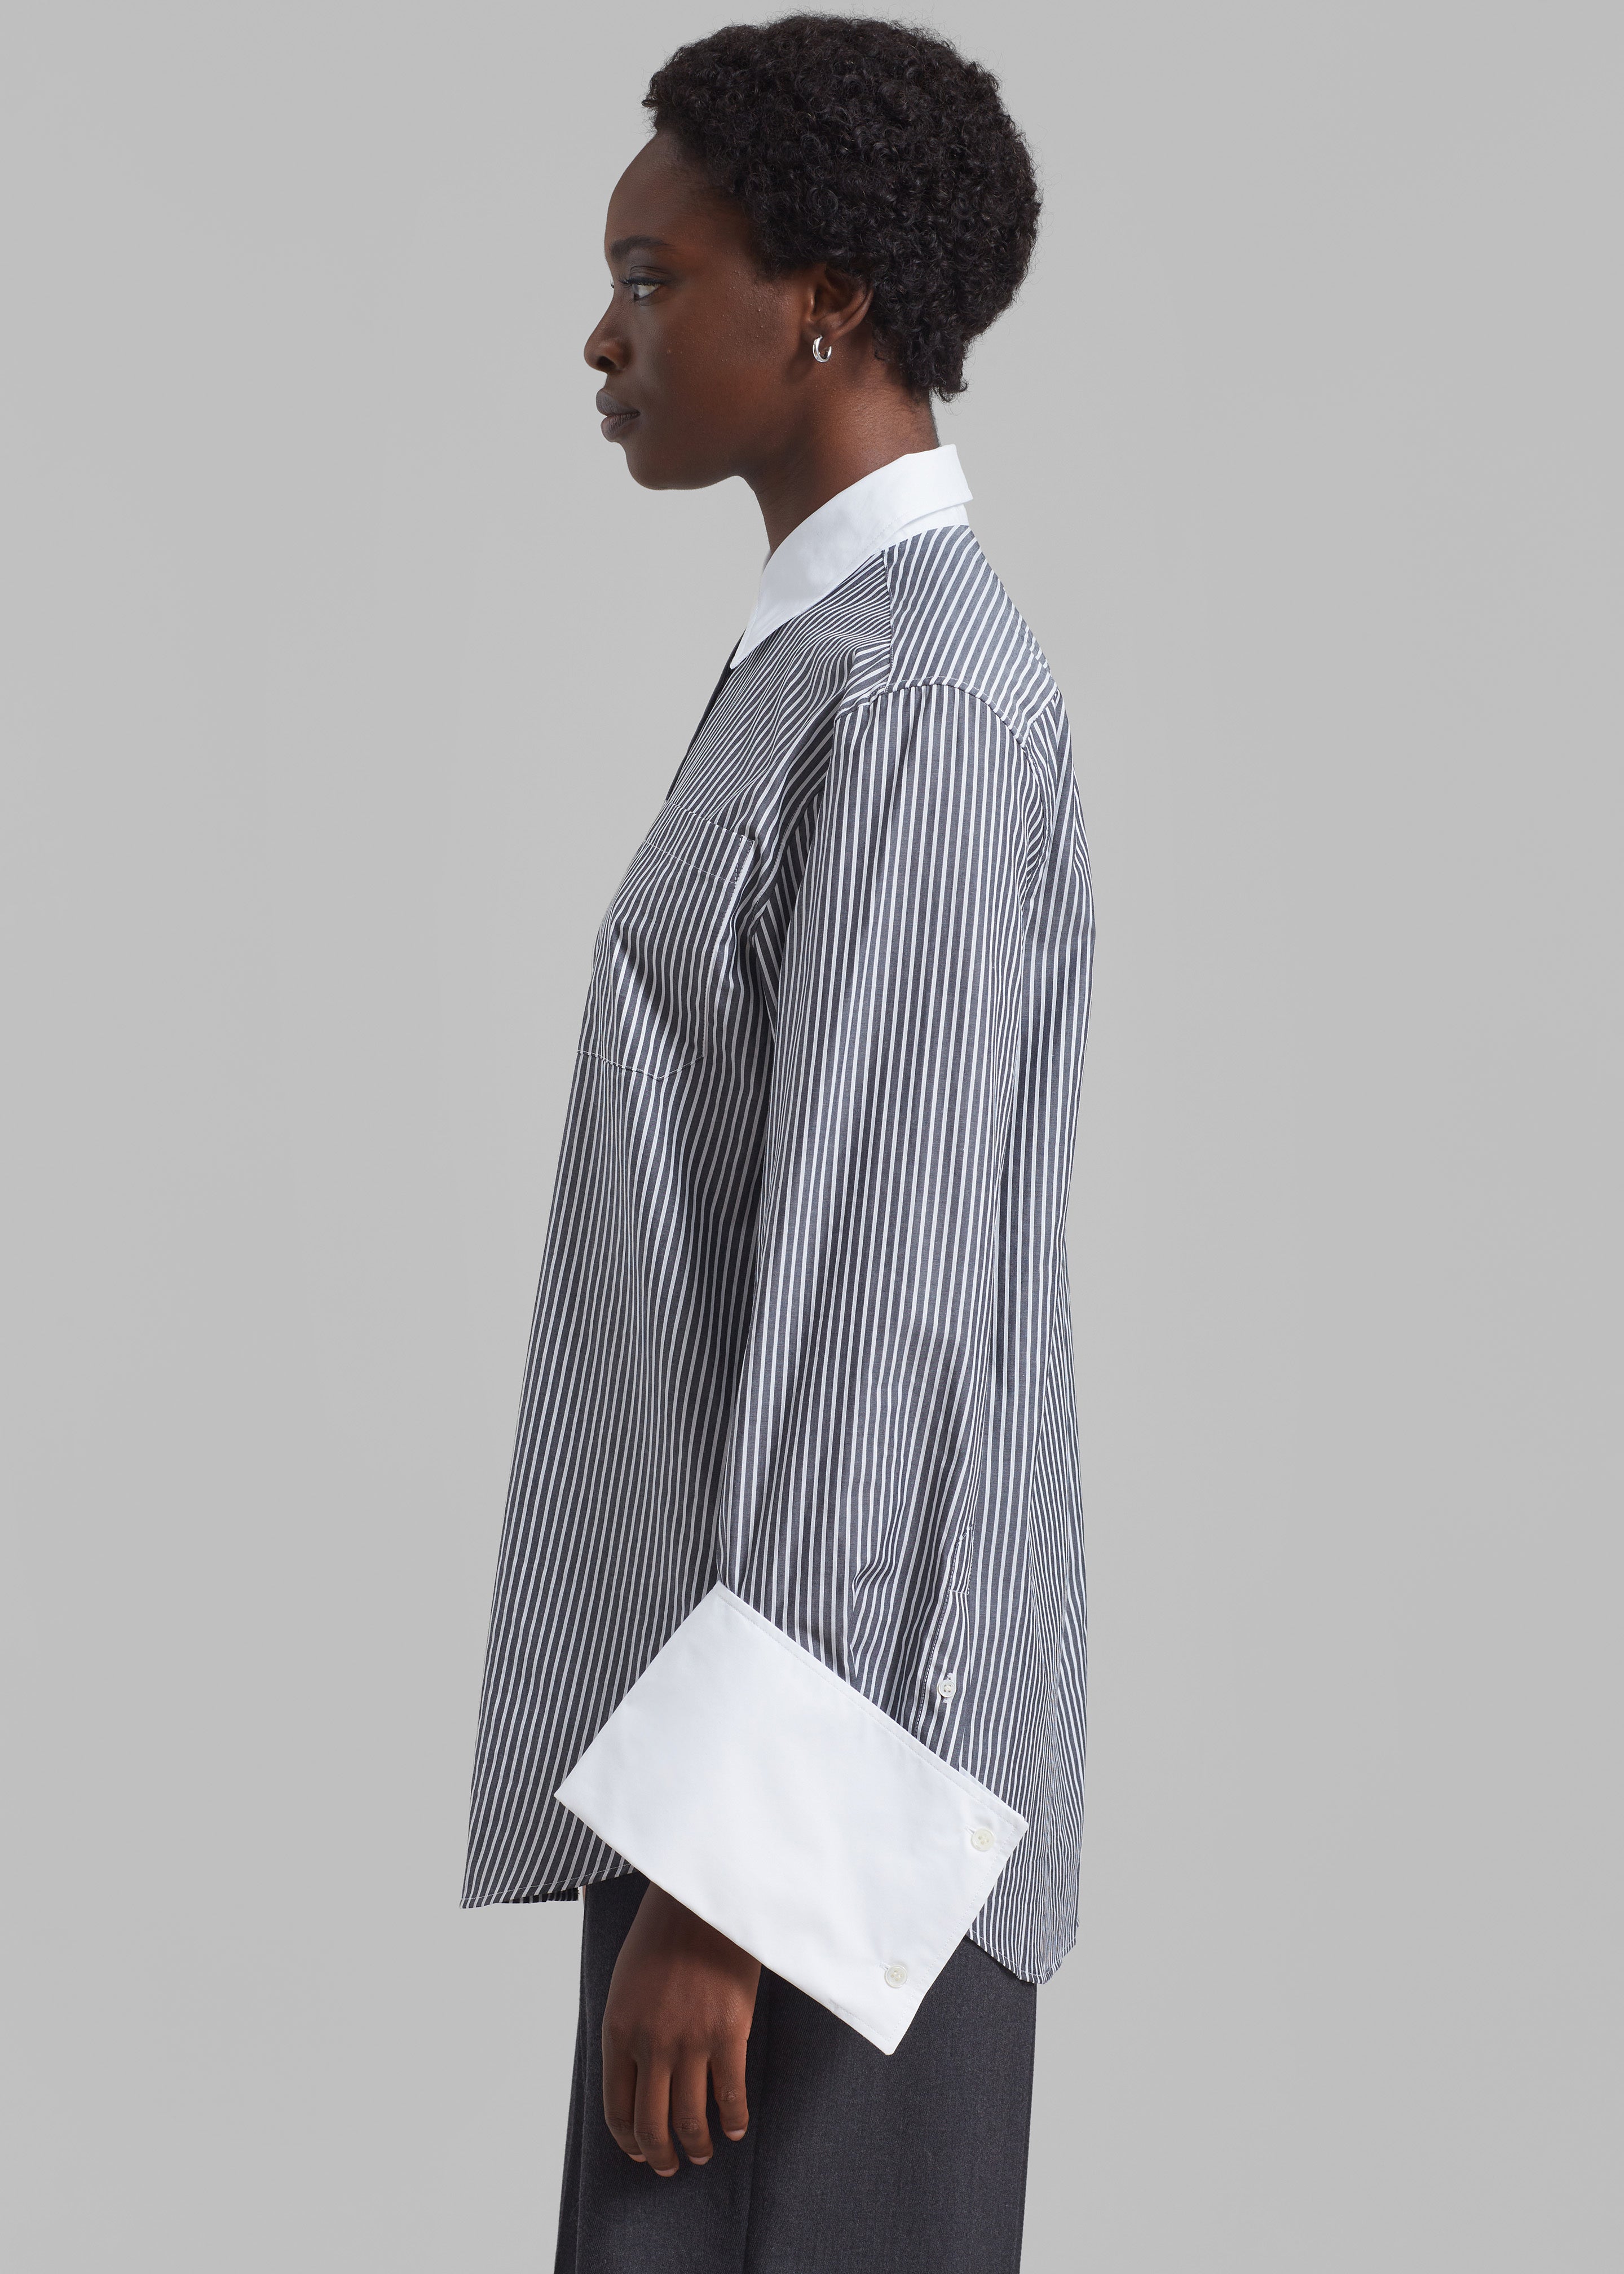 JW Anderson Oversized Cuff Shirt - Charcoal/White - 8